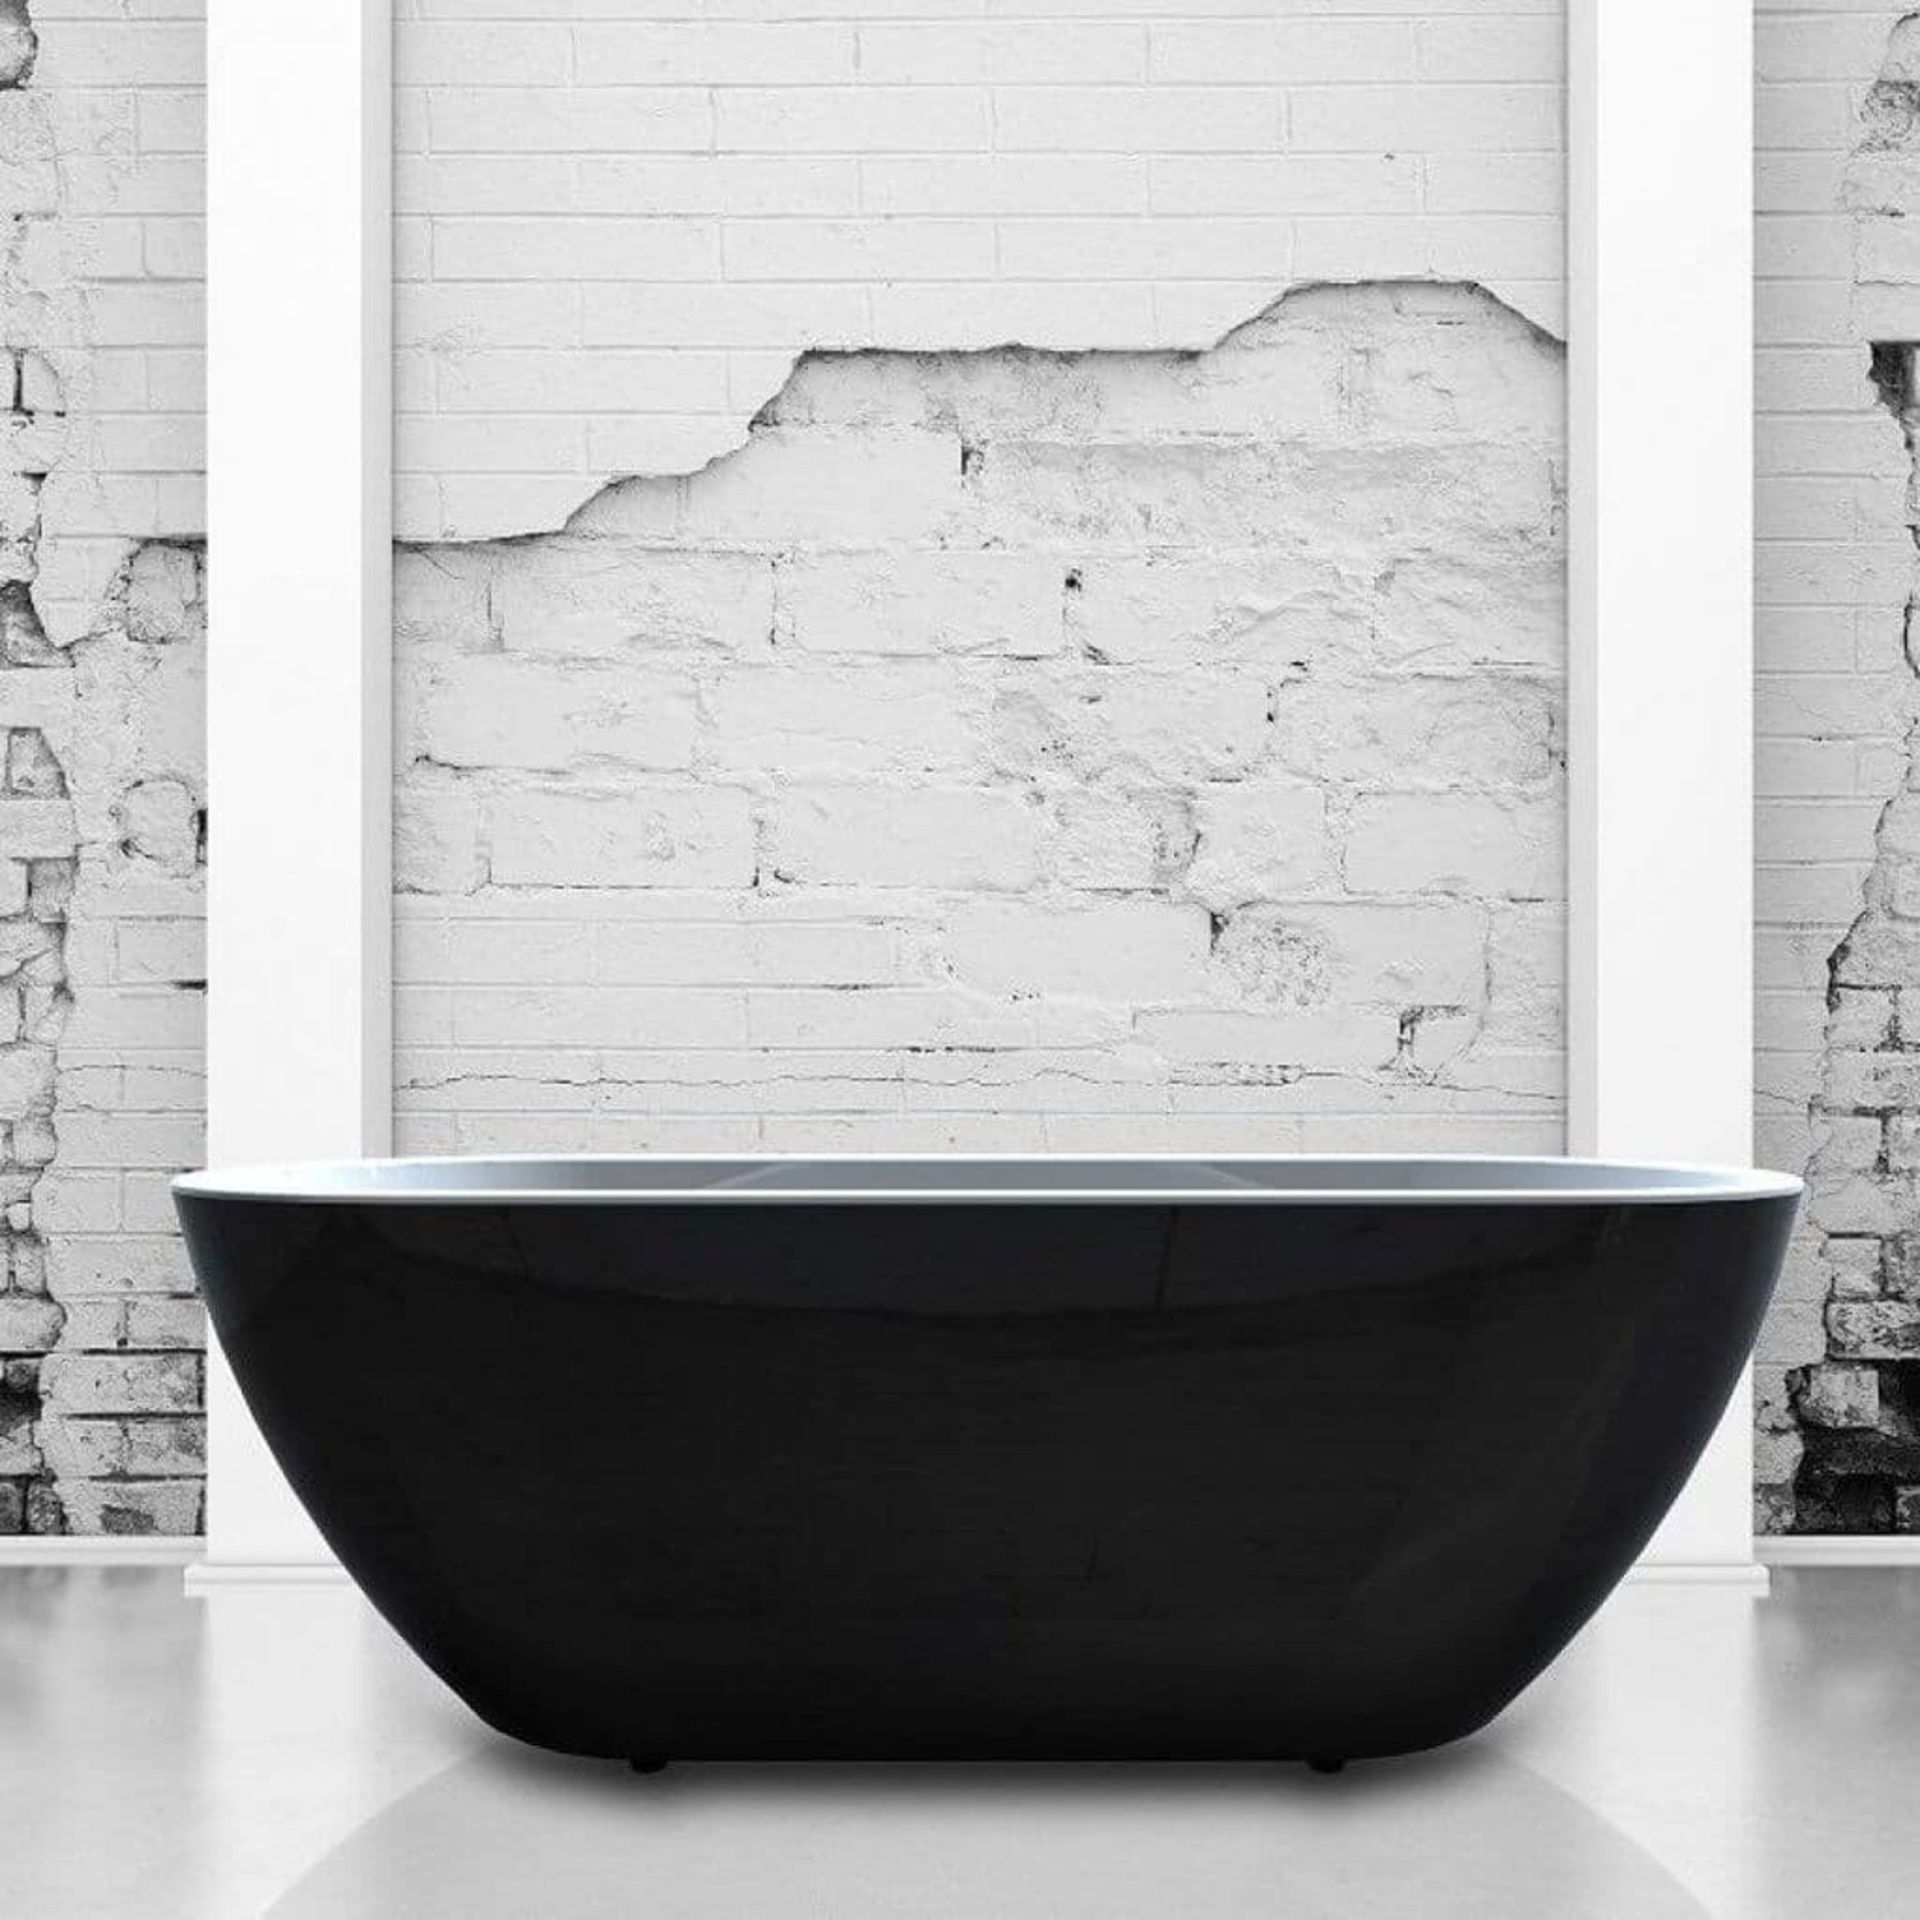 New (ZZ1) 1655x740mm Round Double Ended Black Freestanding Bath. RRP £2,337.Elegant, Contemporary - Image 2 of 3